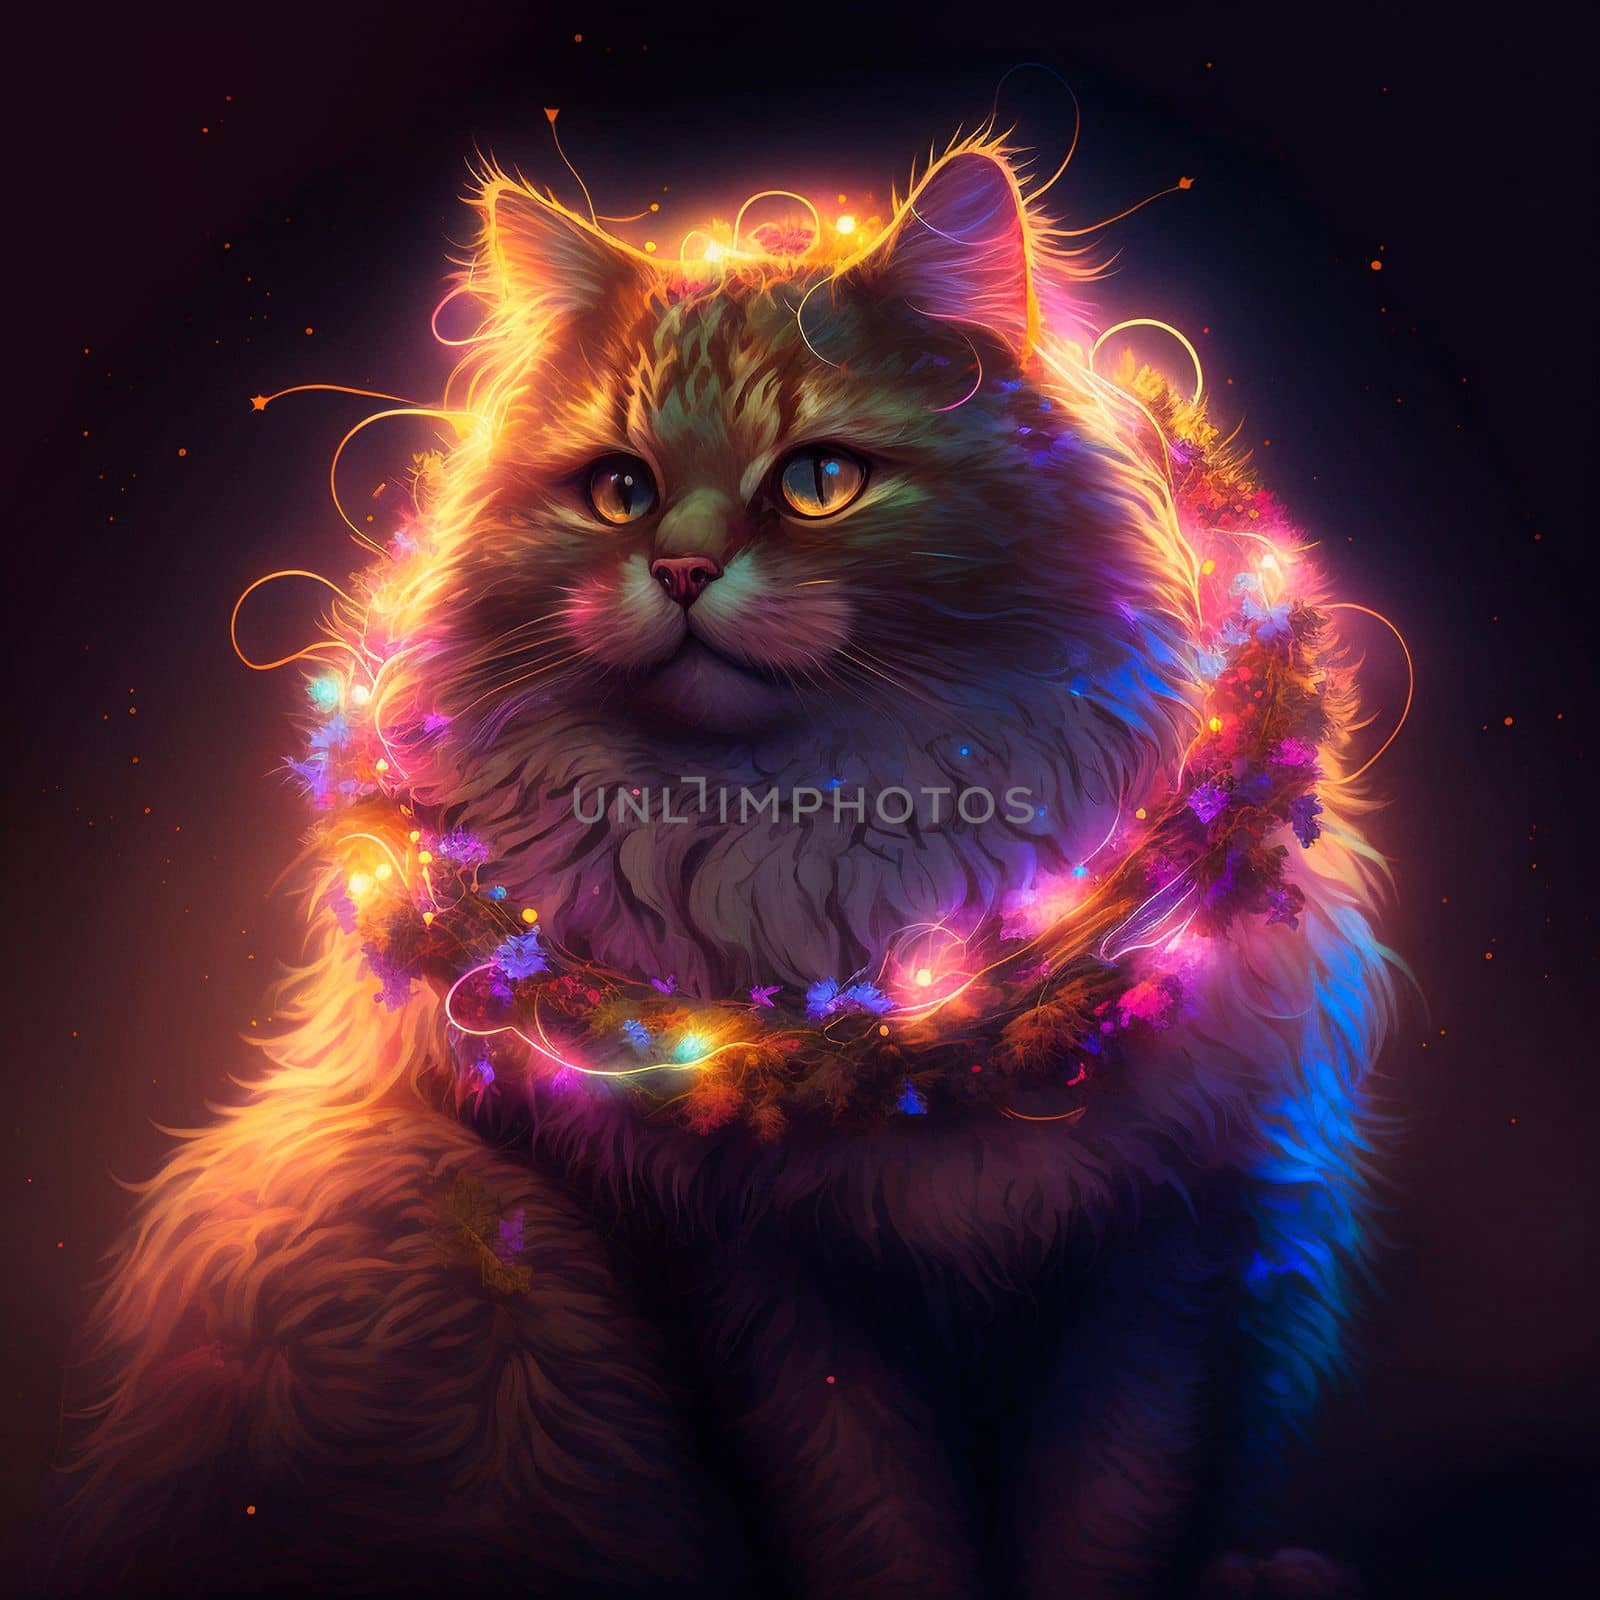 Cat with a garland. High quality illustration